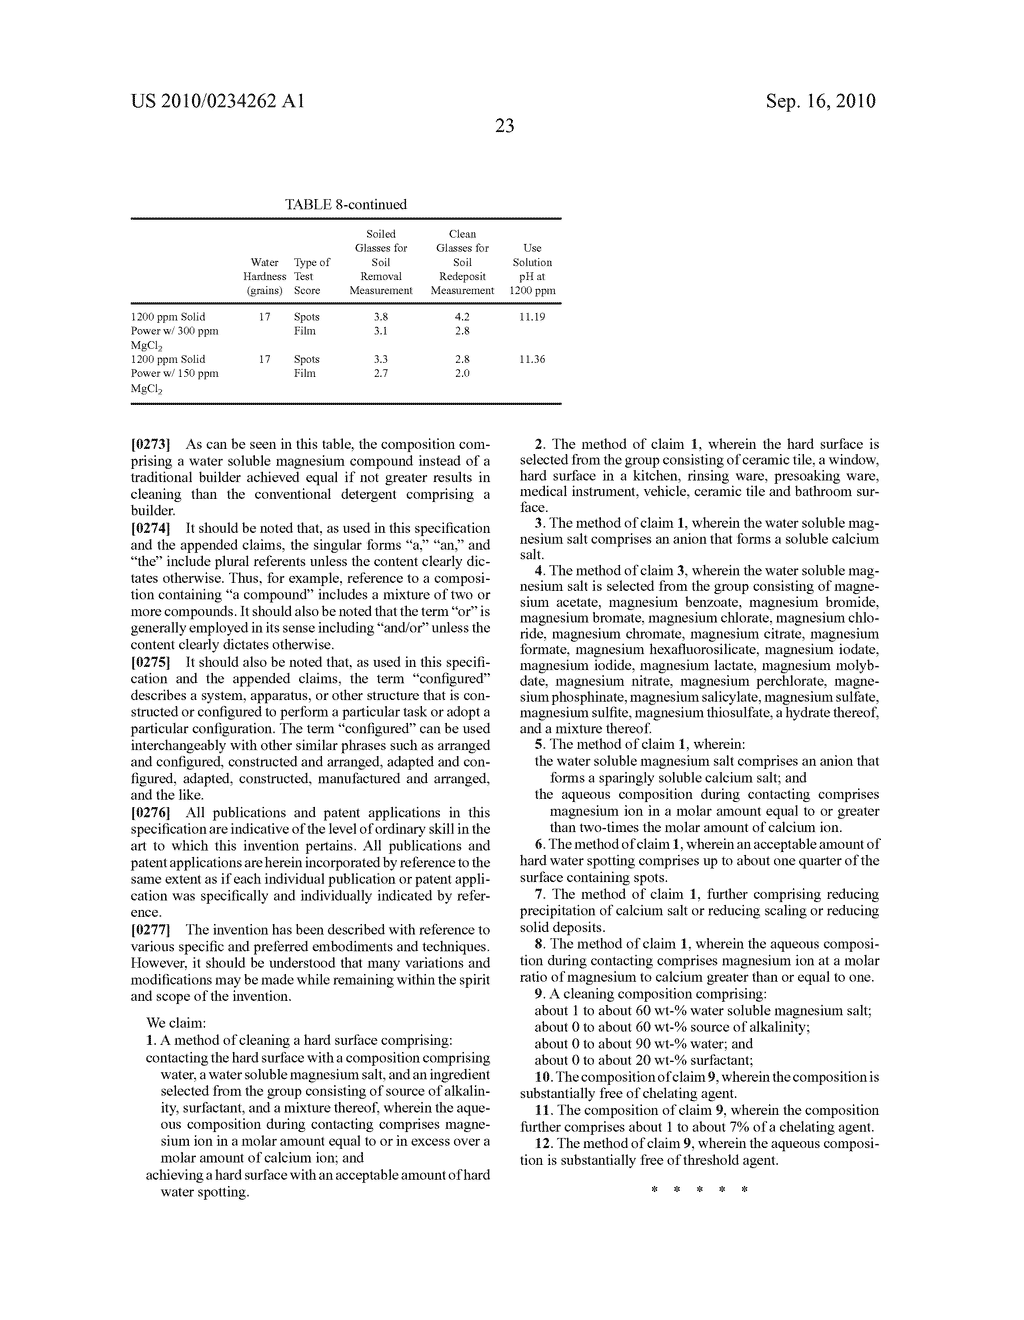 CLEANING COMPOSITIONS CONTAINING WATER SOLUBLE MAGNESIUM COMPOUNDS AND METHODS OF USING THEM - diagram, schematic, and image 40